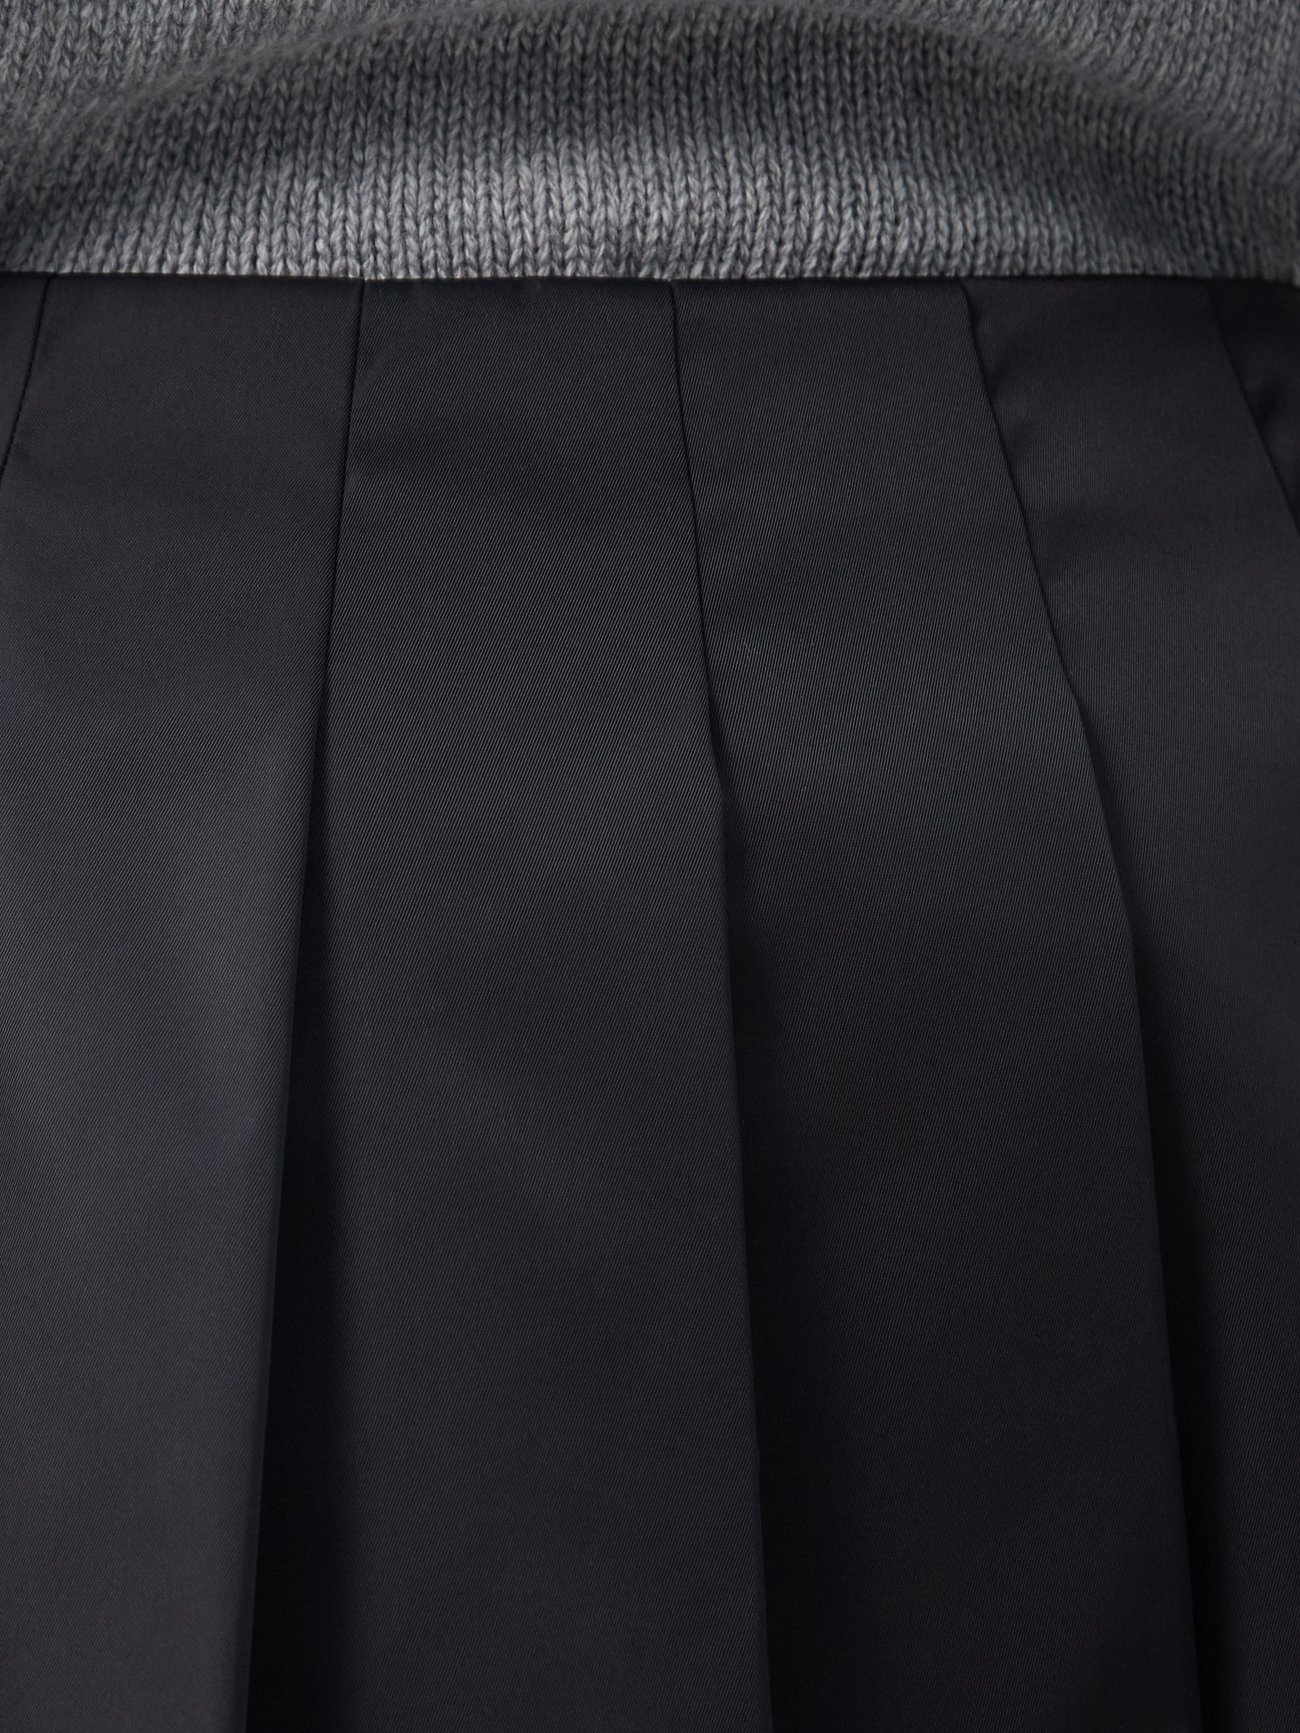 COLLUSION pleated buckle mini skirt in black